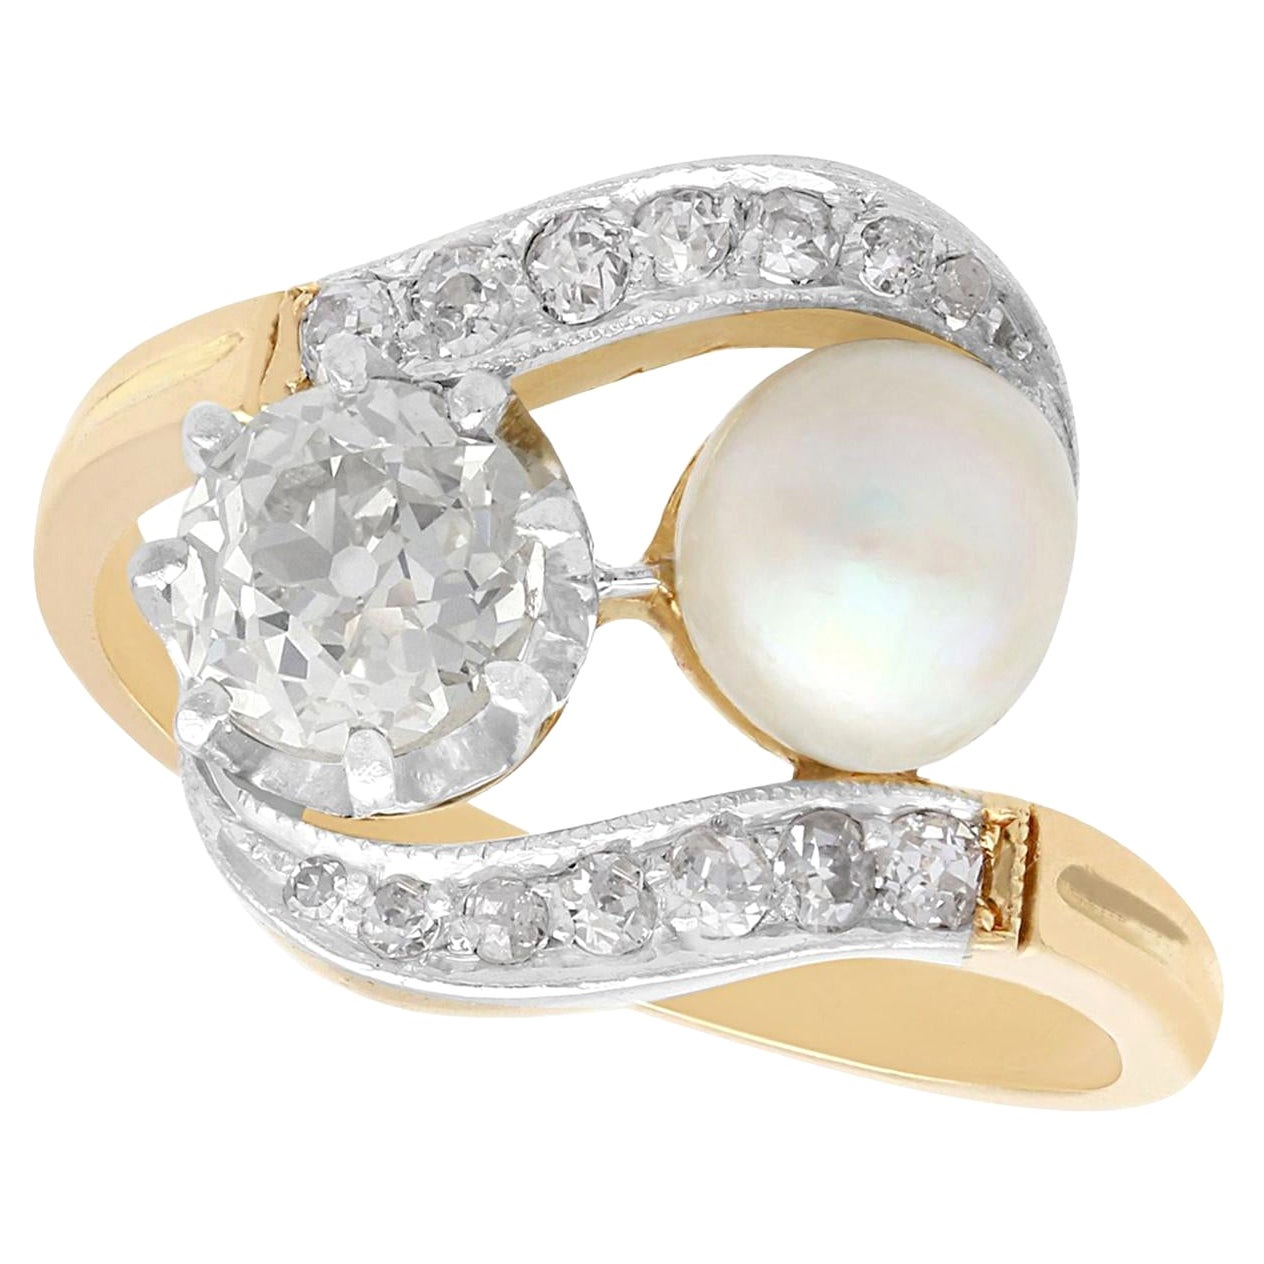 Antique 1.07 Carat Diamond and Natural Saltwater Pearl Yellow Gold Twist Ring